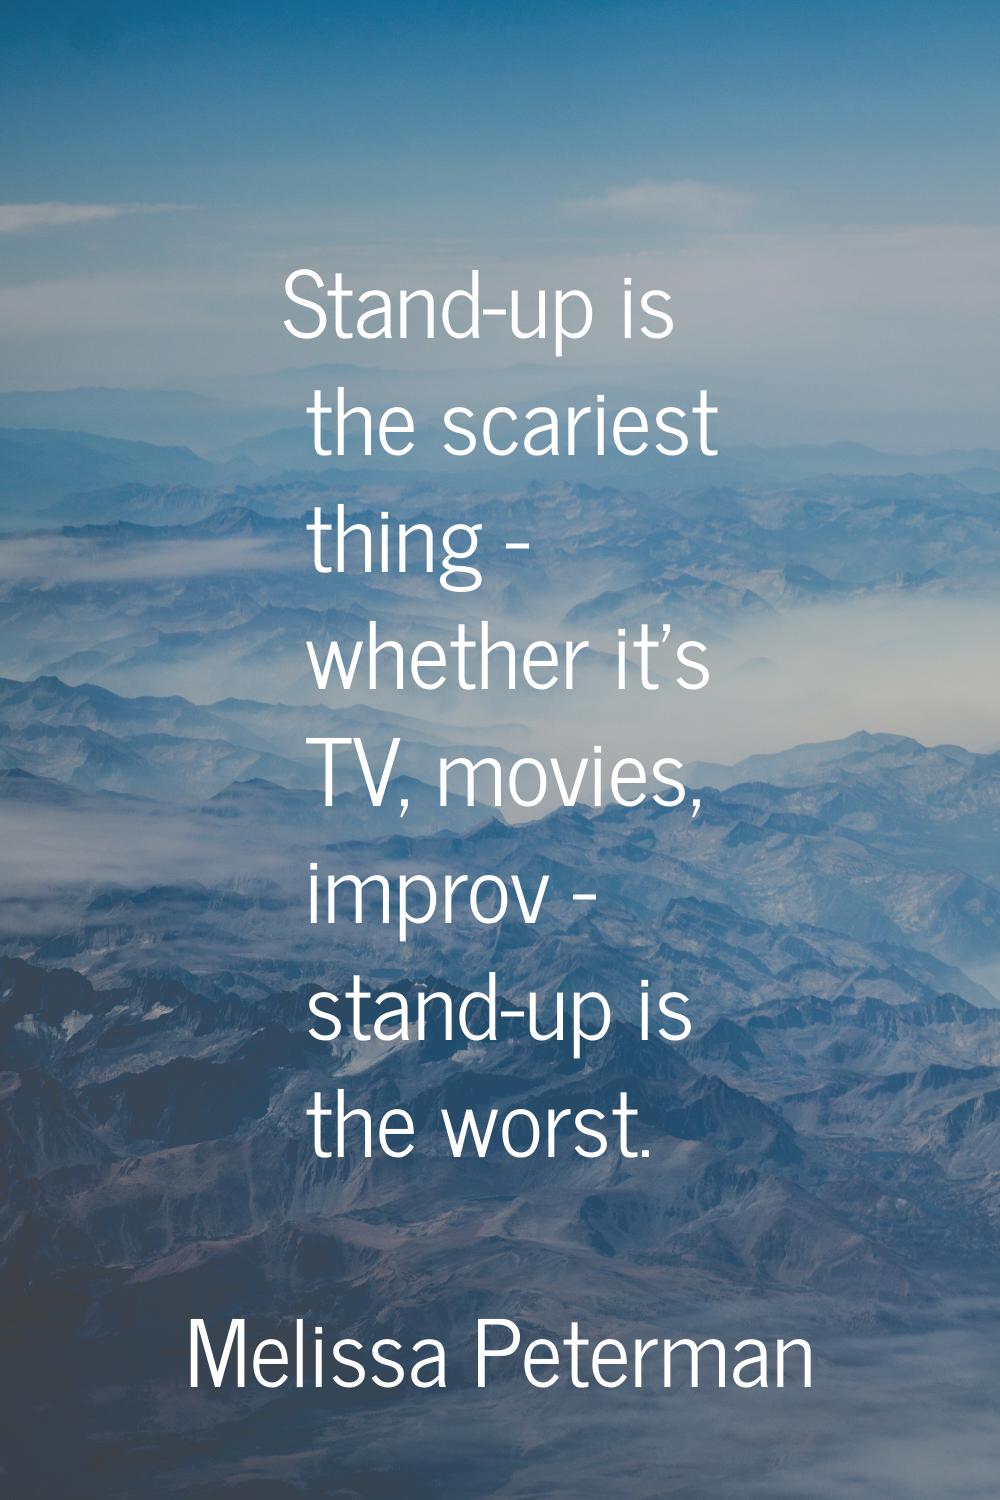 Stand-up is the scariest thing - whether it's TV, movies, improv - stand-up is the worst.